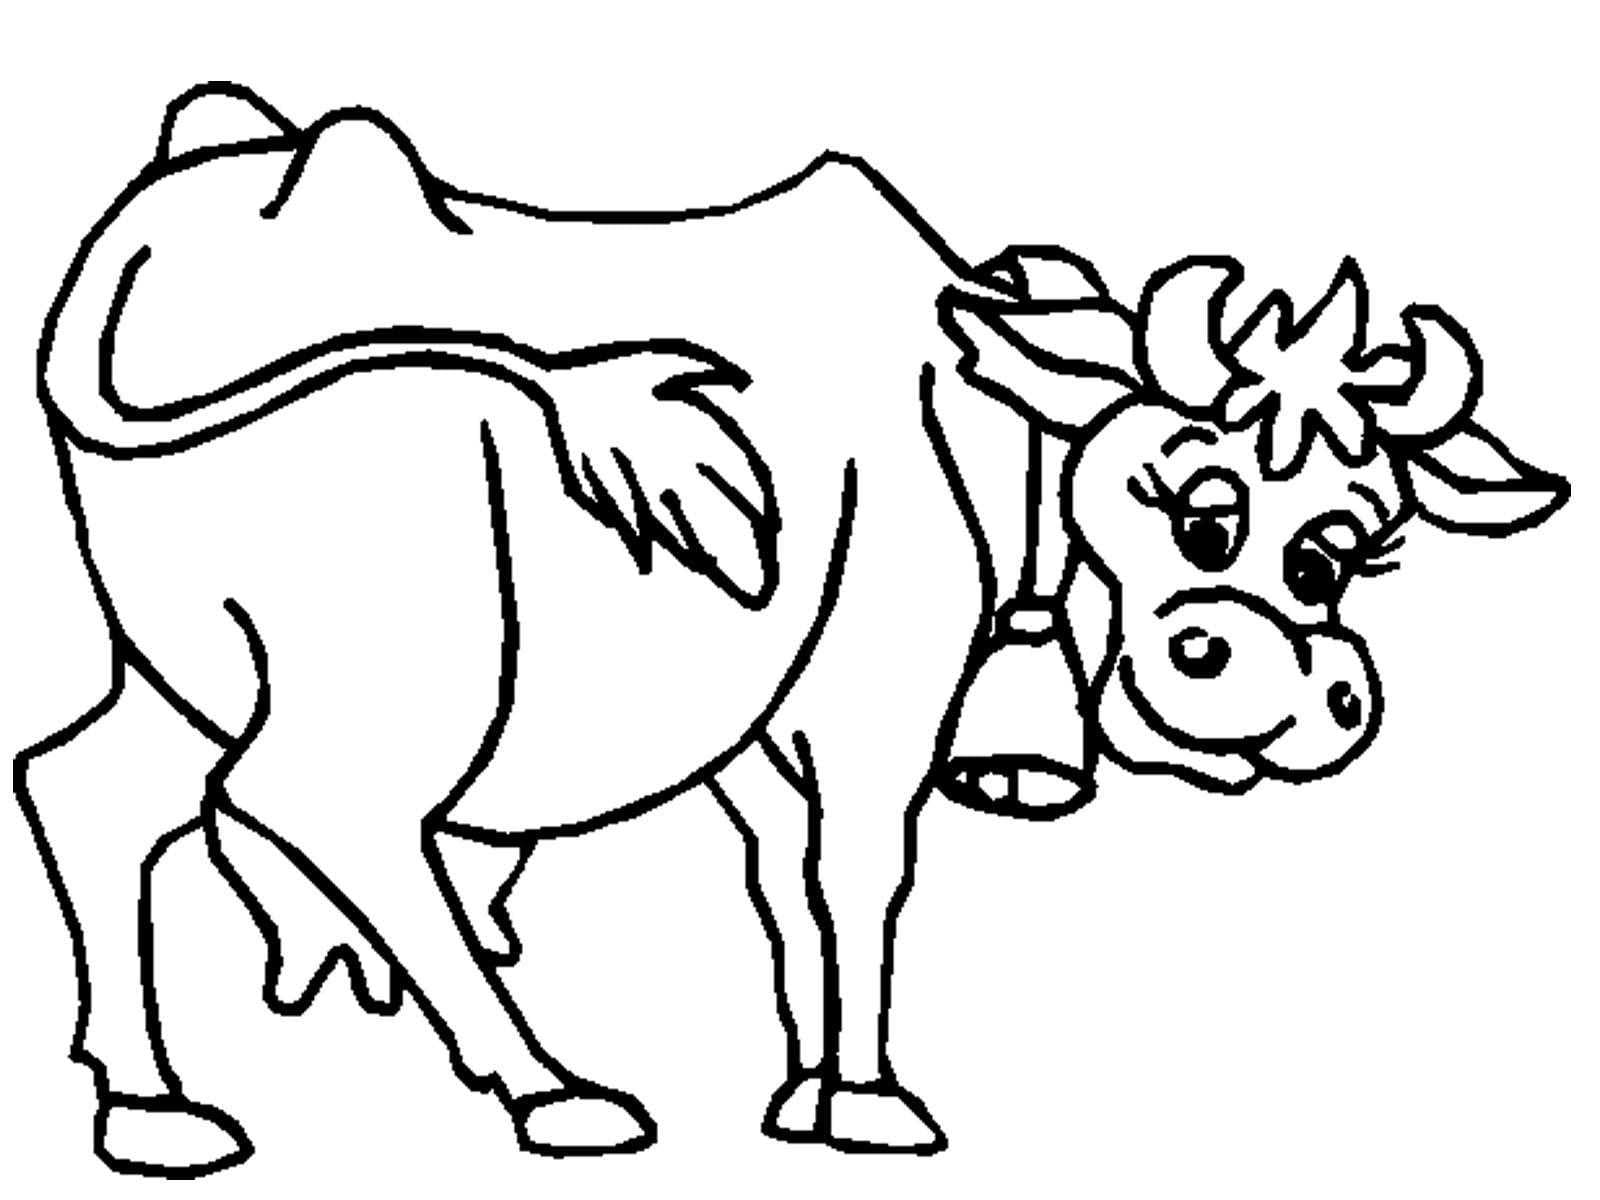 Exquisite cow coloring book for 5-6 year olds